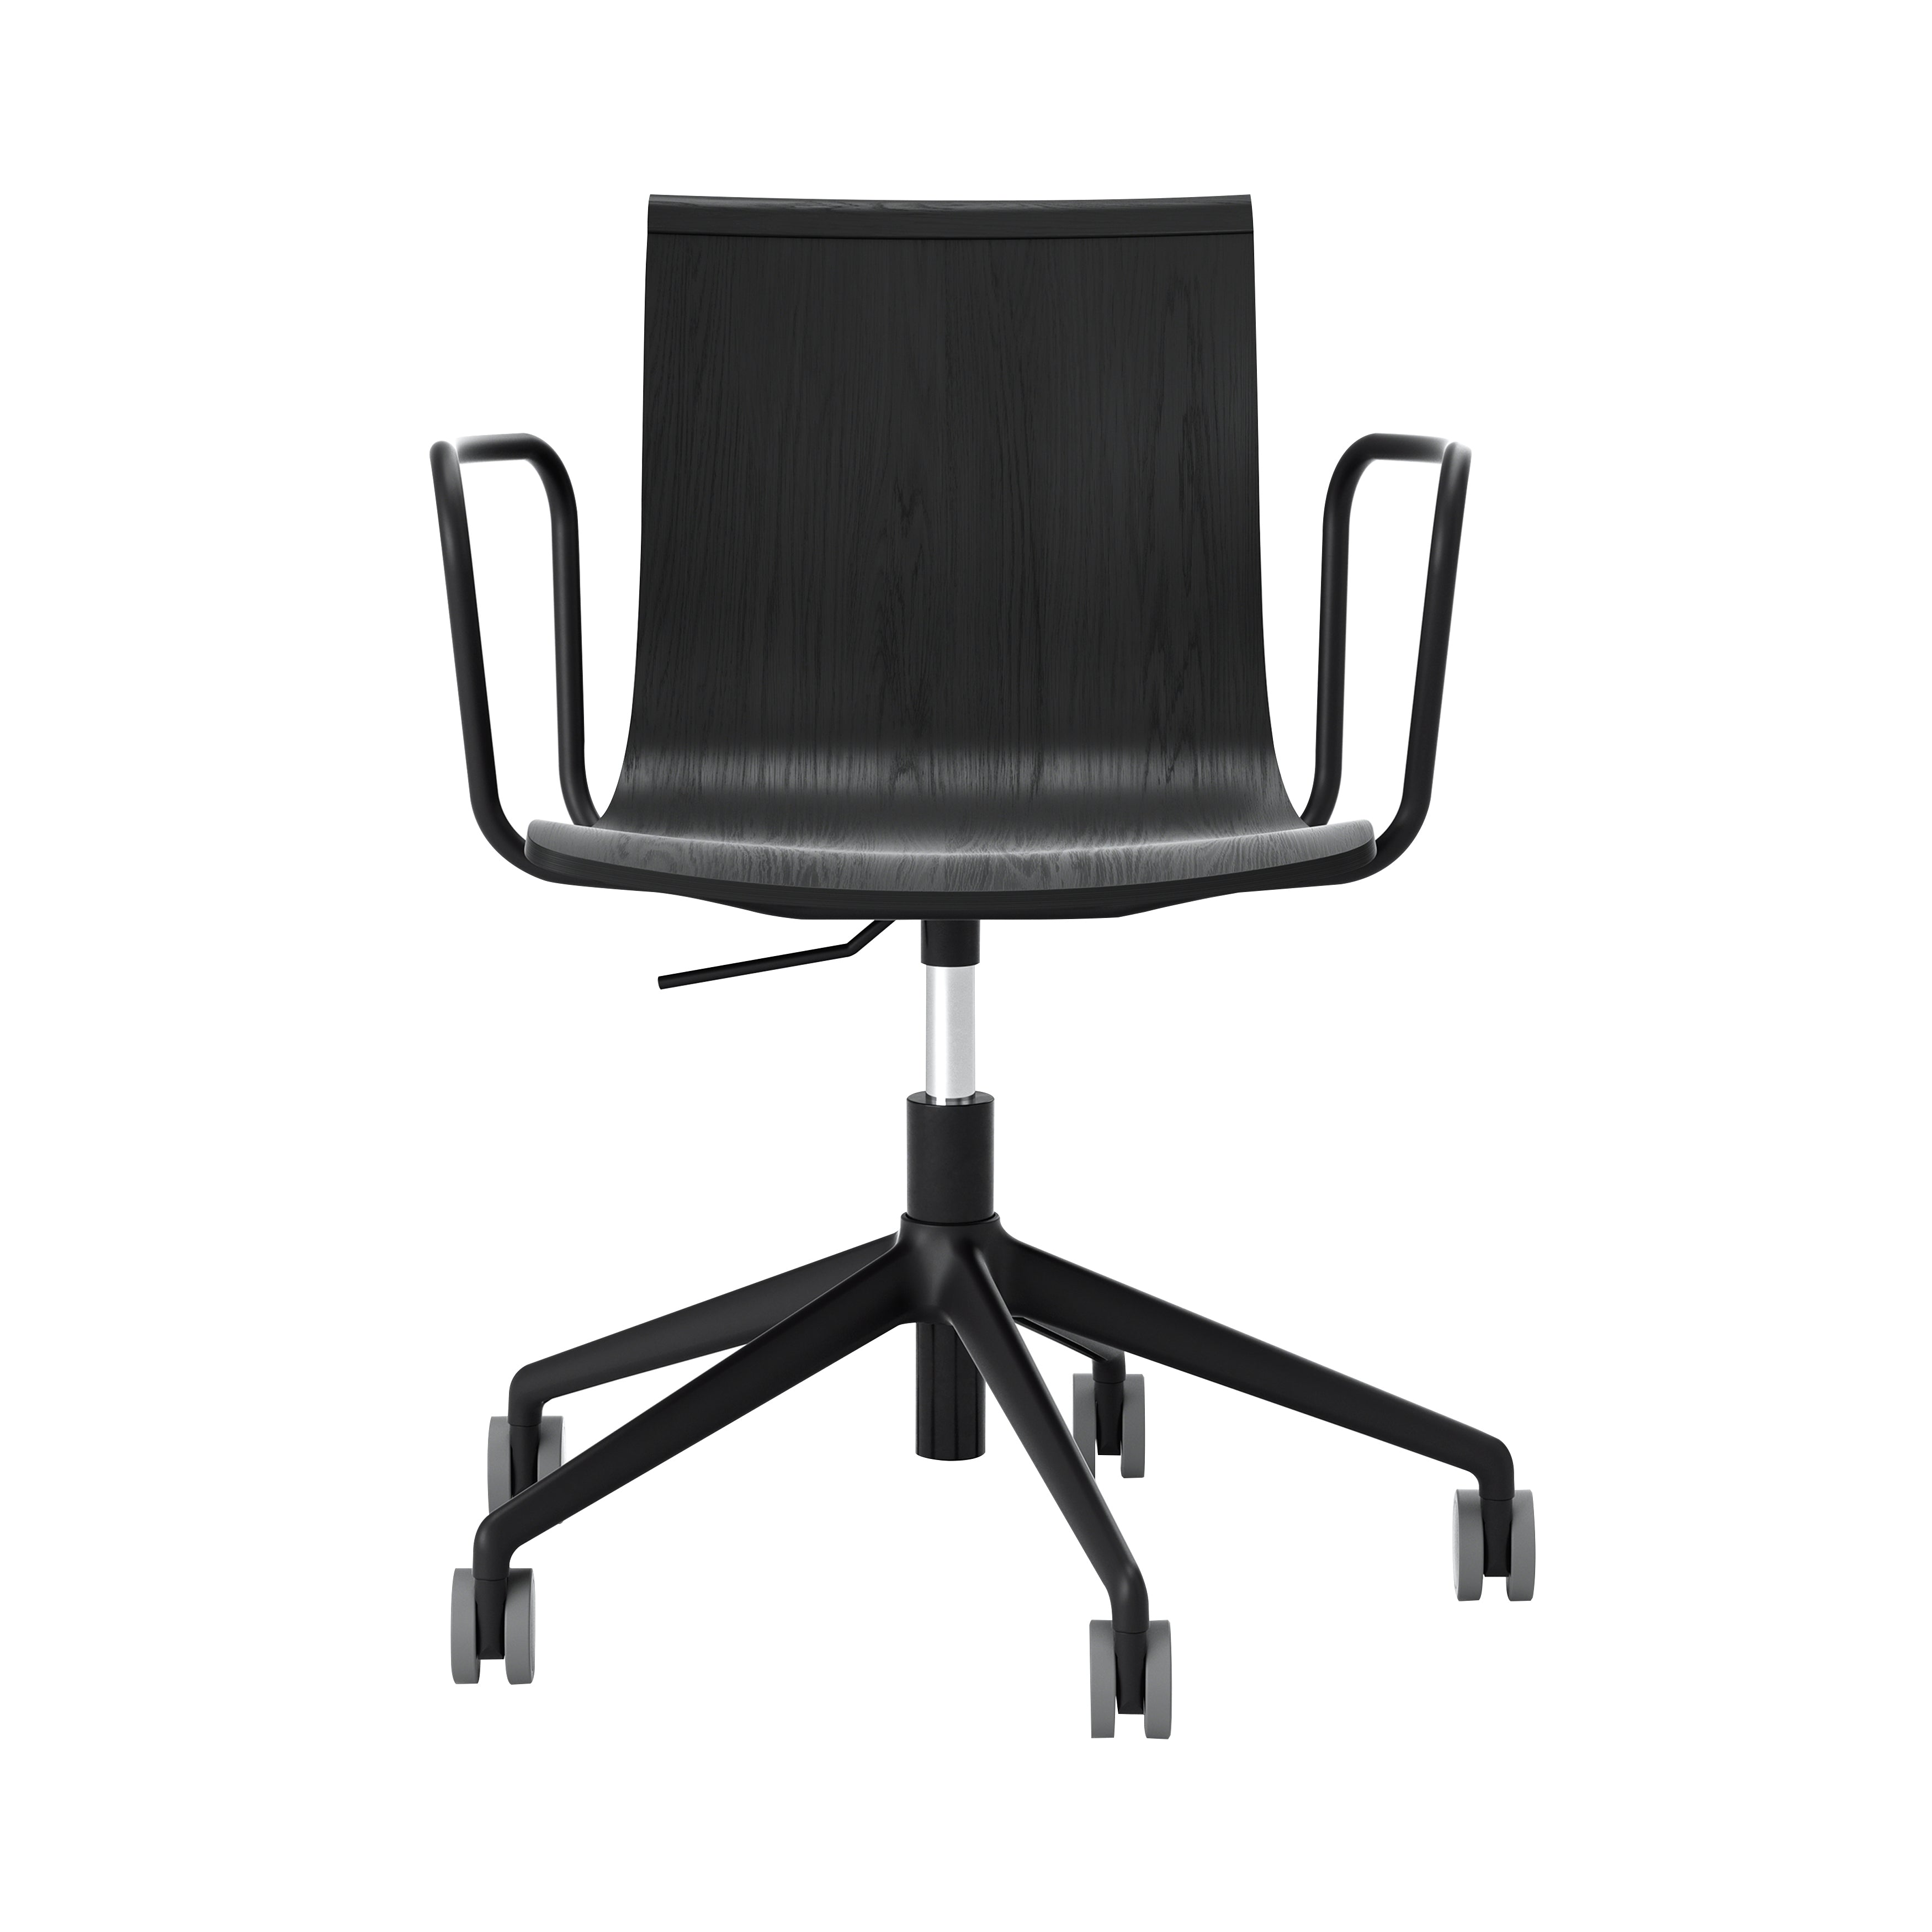 Serif Chair: 5 Star Base with Armrests + Black + Black Stained Oak